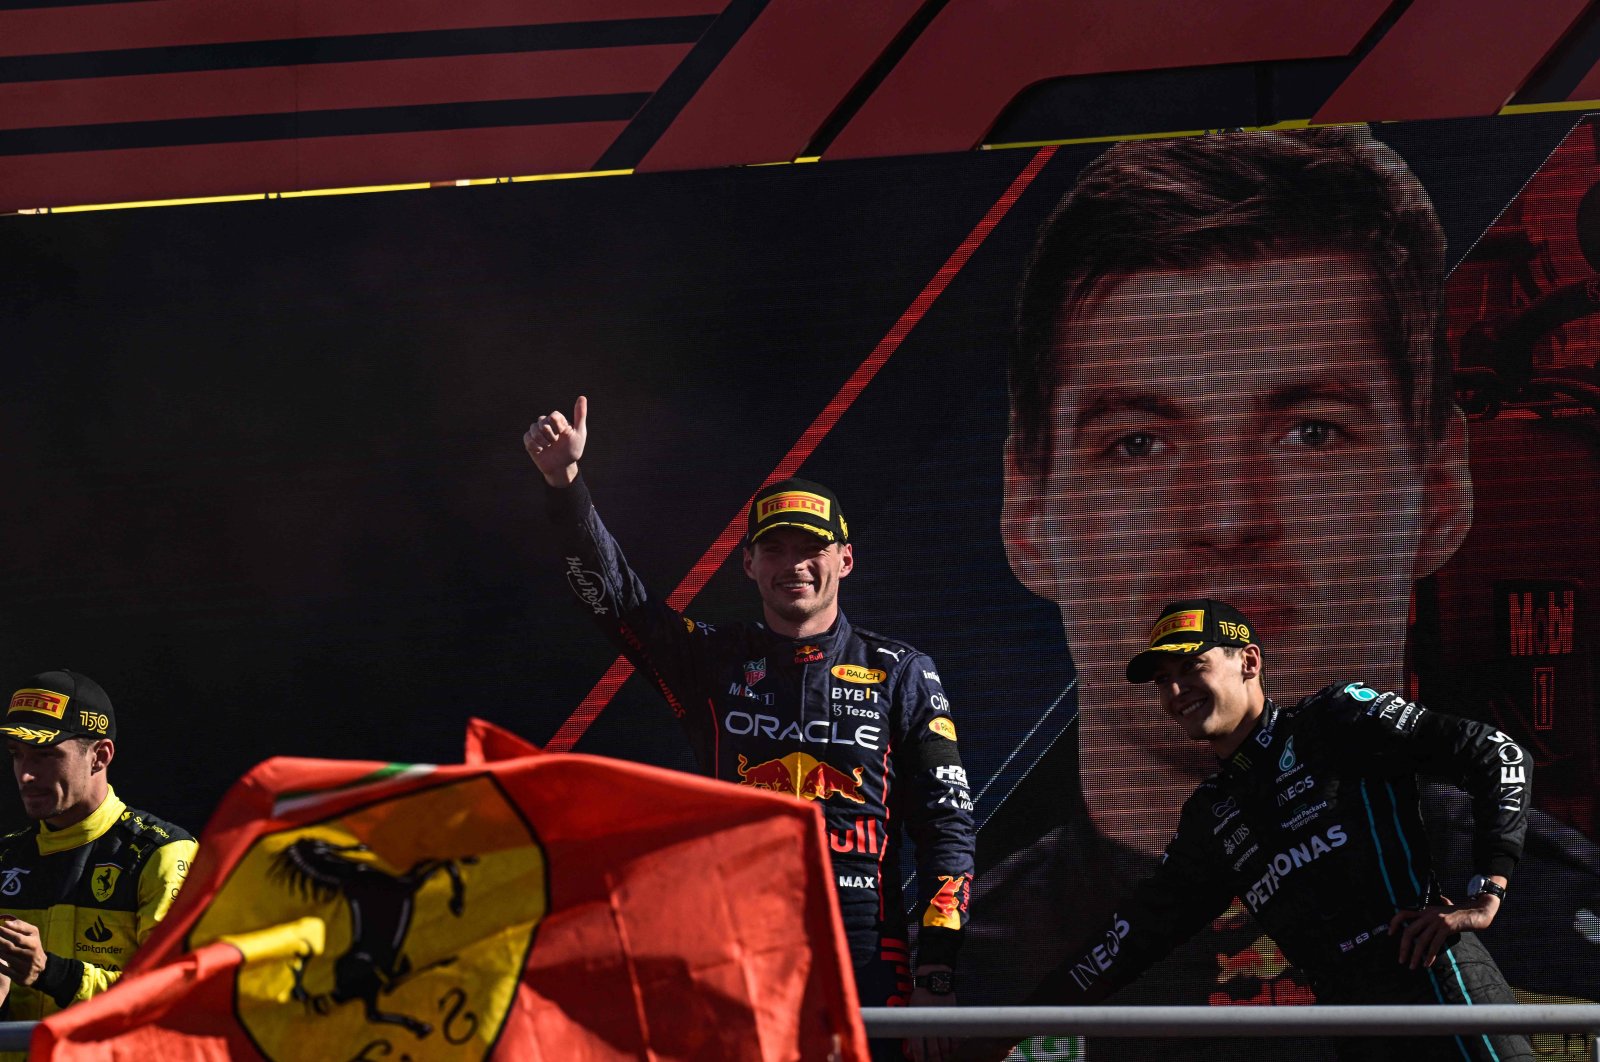 Max Verstappen (C) celebrates with Charles Leclerc (L) and George Russell (R) on the podium after the Italian Formula One Grand Prix at the Autodromo Nazionale circuit, Monza, Italy, Sept.11, 2022. (AFP Photo)